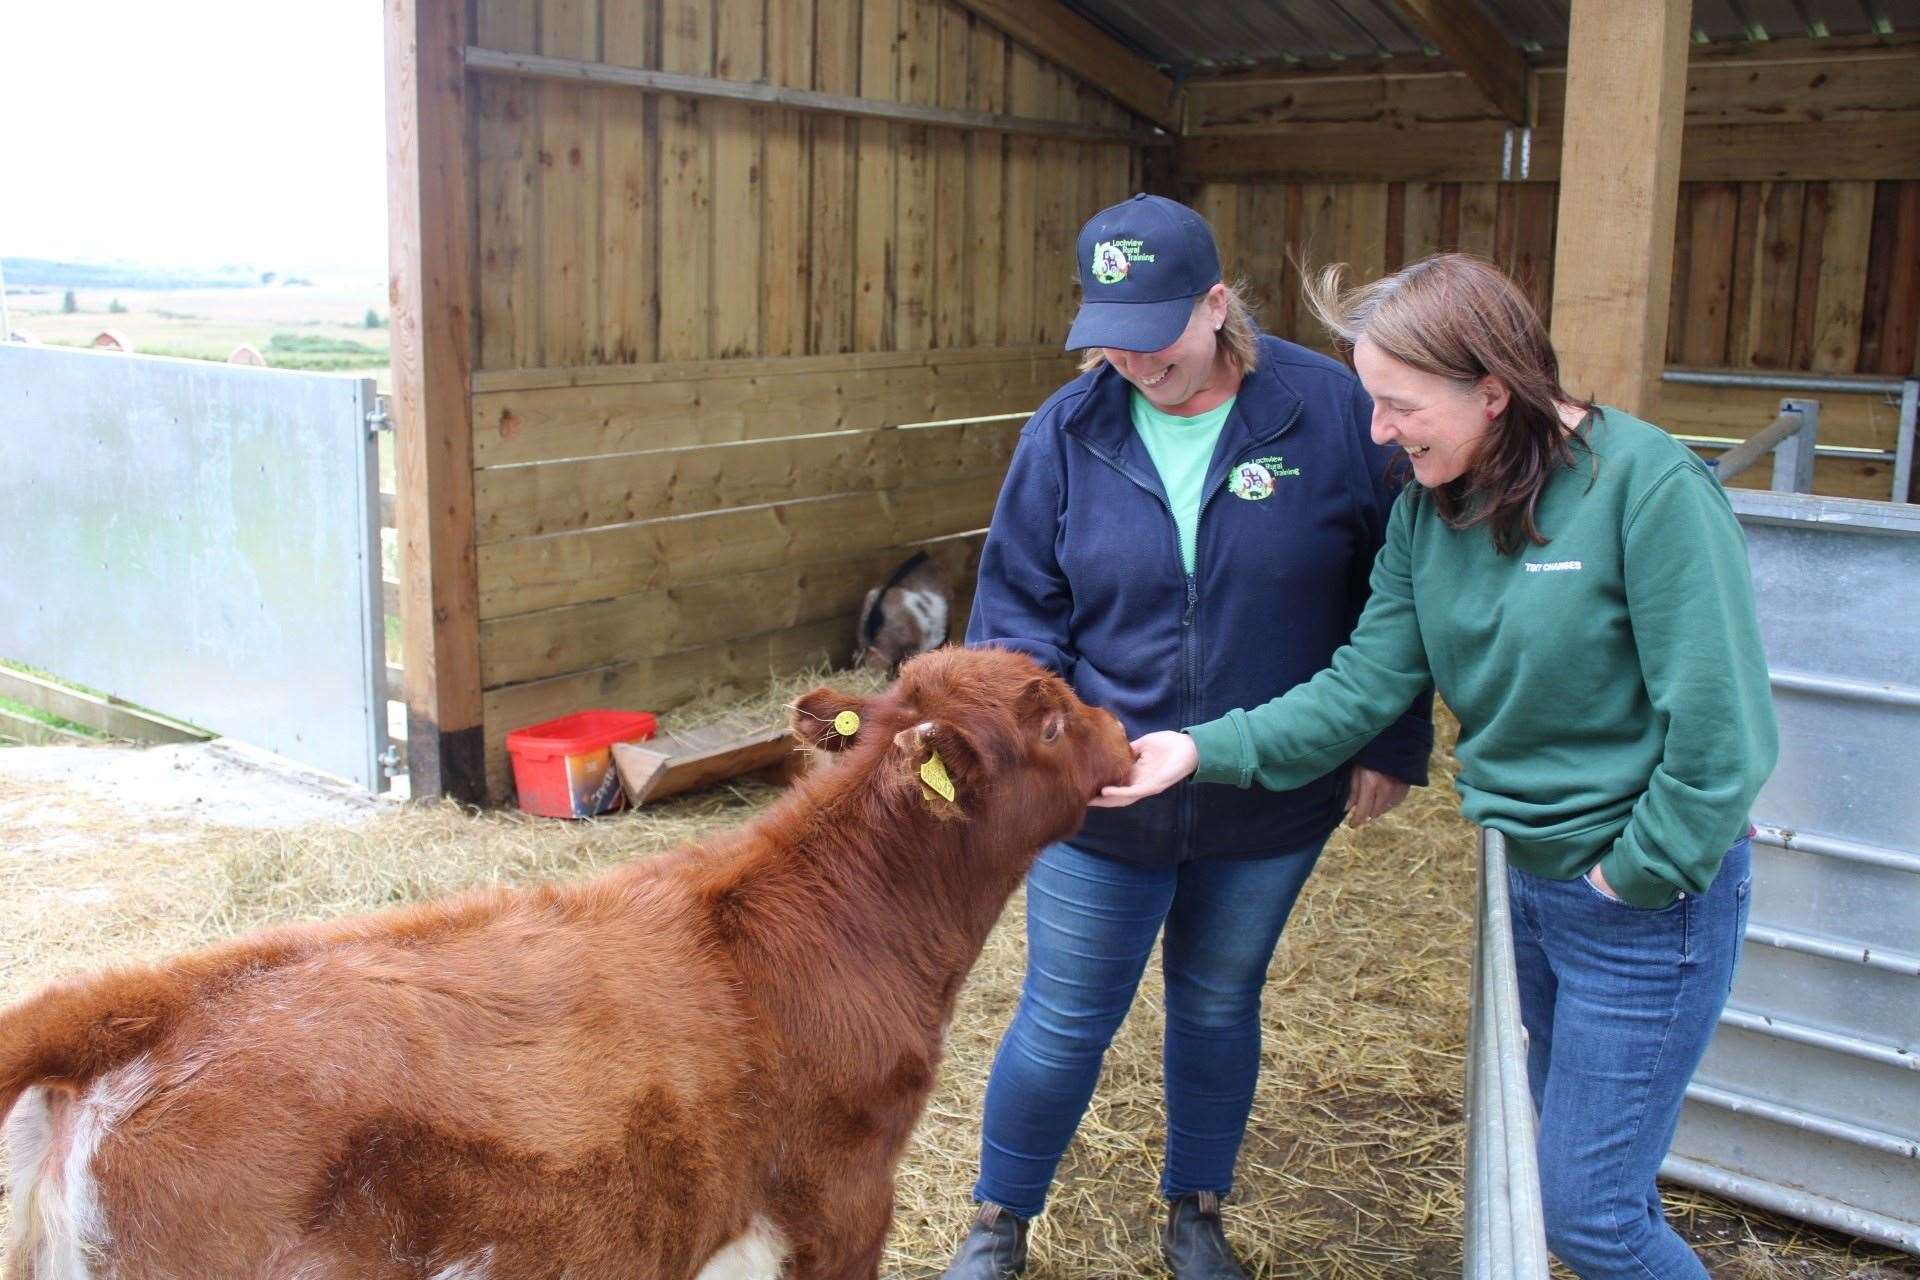 The training centre is located on a working croft and Maree Todd (right) was shown round by Cara Cameron.